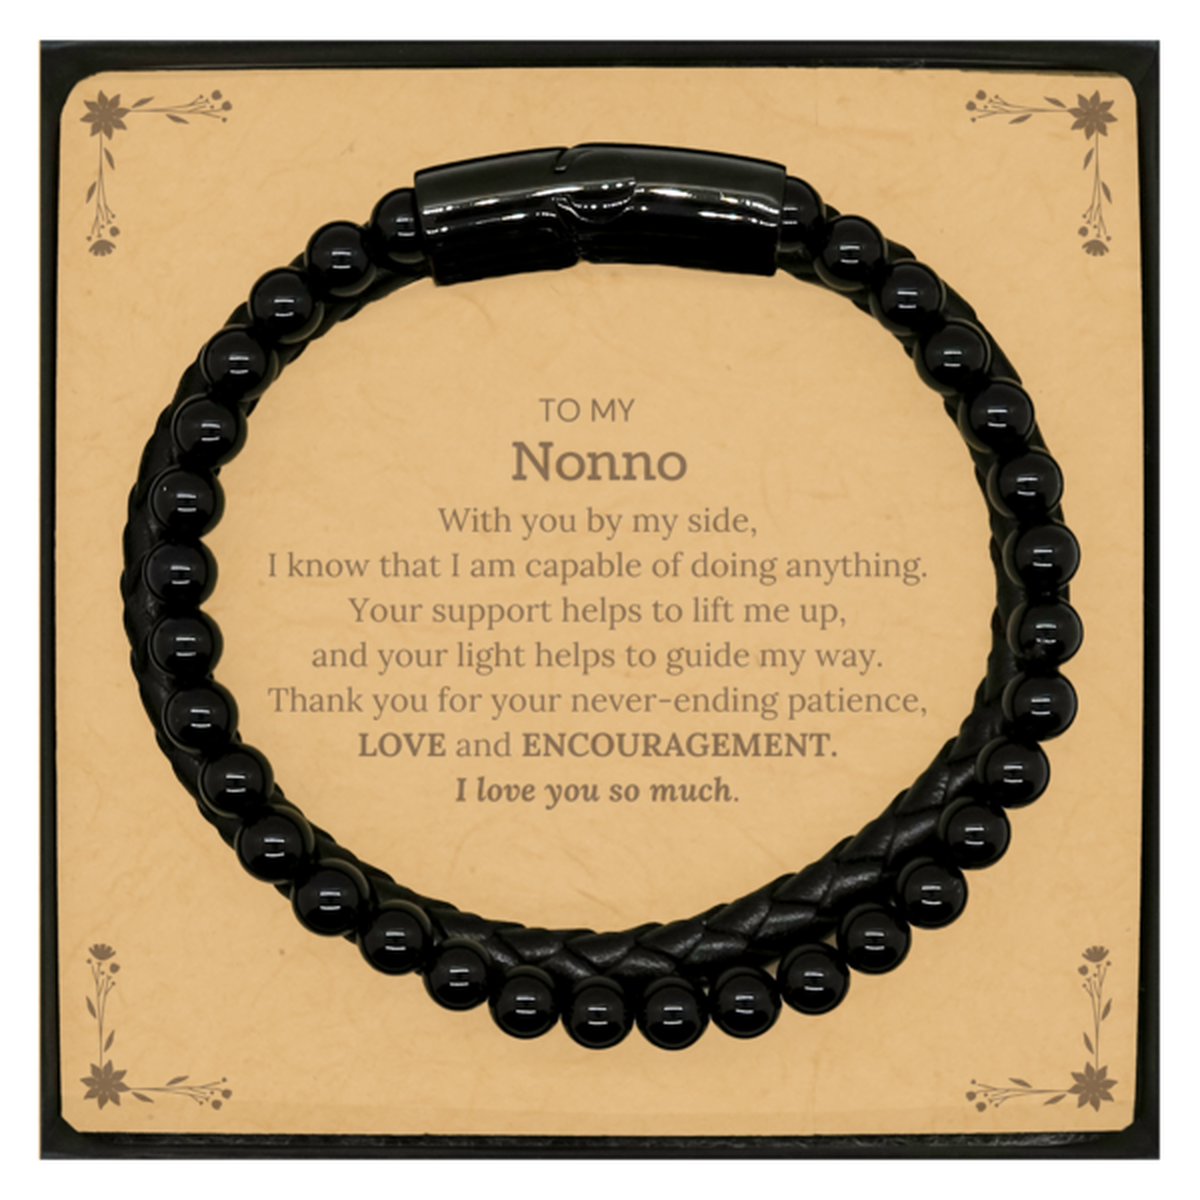 Appreciation Nonno Stone Leather Bracelets Gifts, To My Nonno Birthday Christmas Wedding Keepsake Gifts for Nonno With you by my side, I know that I am capable of doing anything. I love you so much